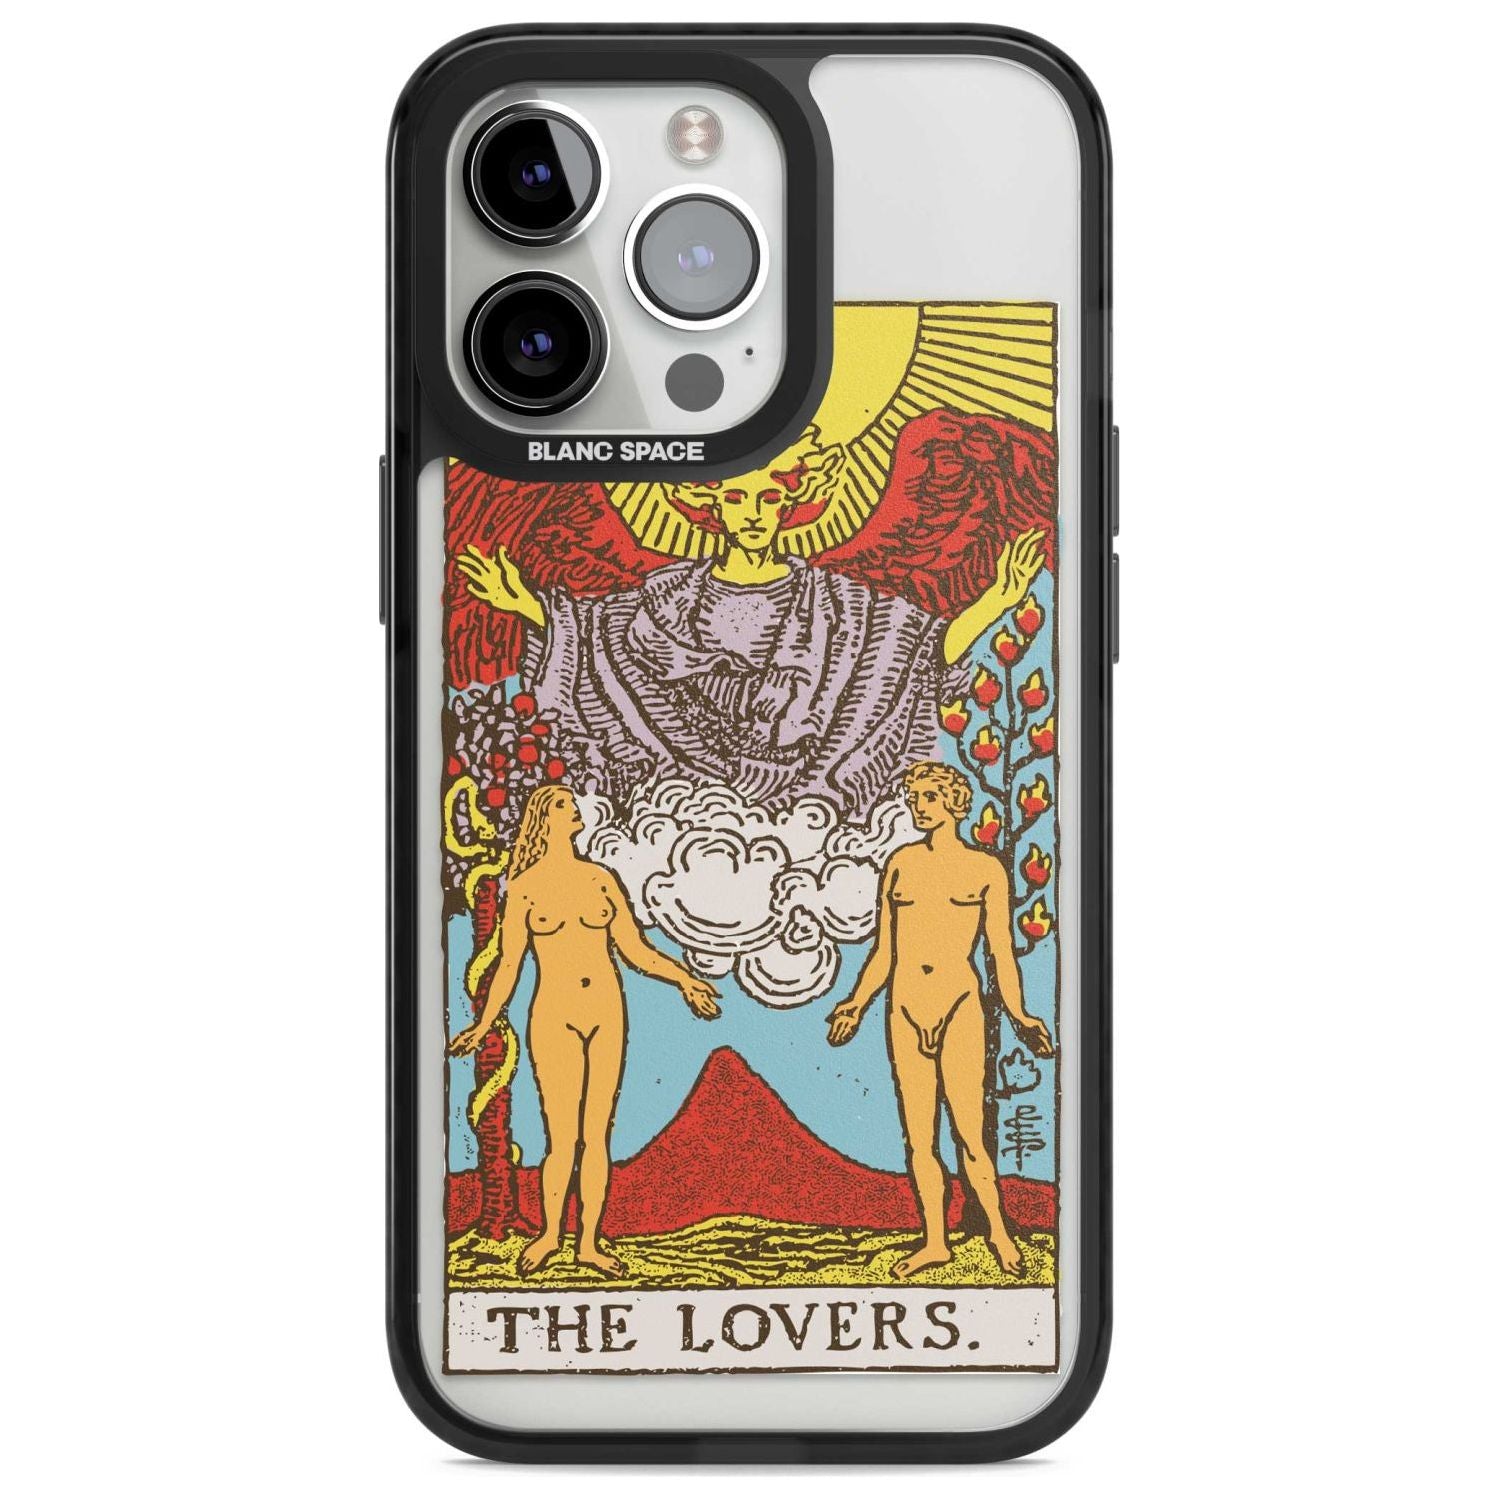 Personalised The Lovers Tarot Card - Colour Custom Phone Case iPhone 15 Pro Max / Magsafe Black Impact Case,iPhone 15 Pro / Magsafe Black Impact Case,iPhone 14 Pro Max / Magsafe Black Impact Case,iPhone 14 Pro / Magsafe Black Impact Case,iPhone 13 Pro / Magsafe Black Impact Case Blanc Space